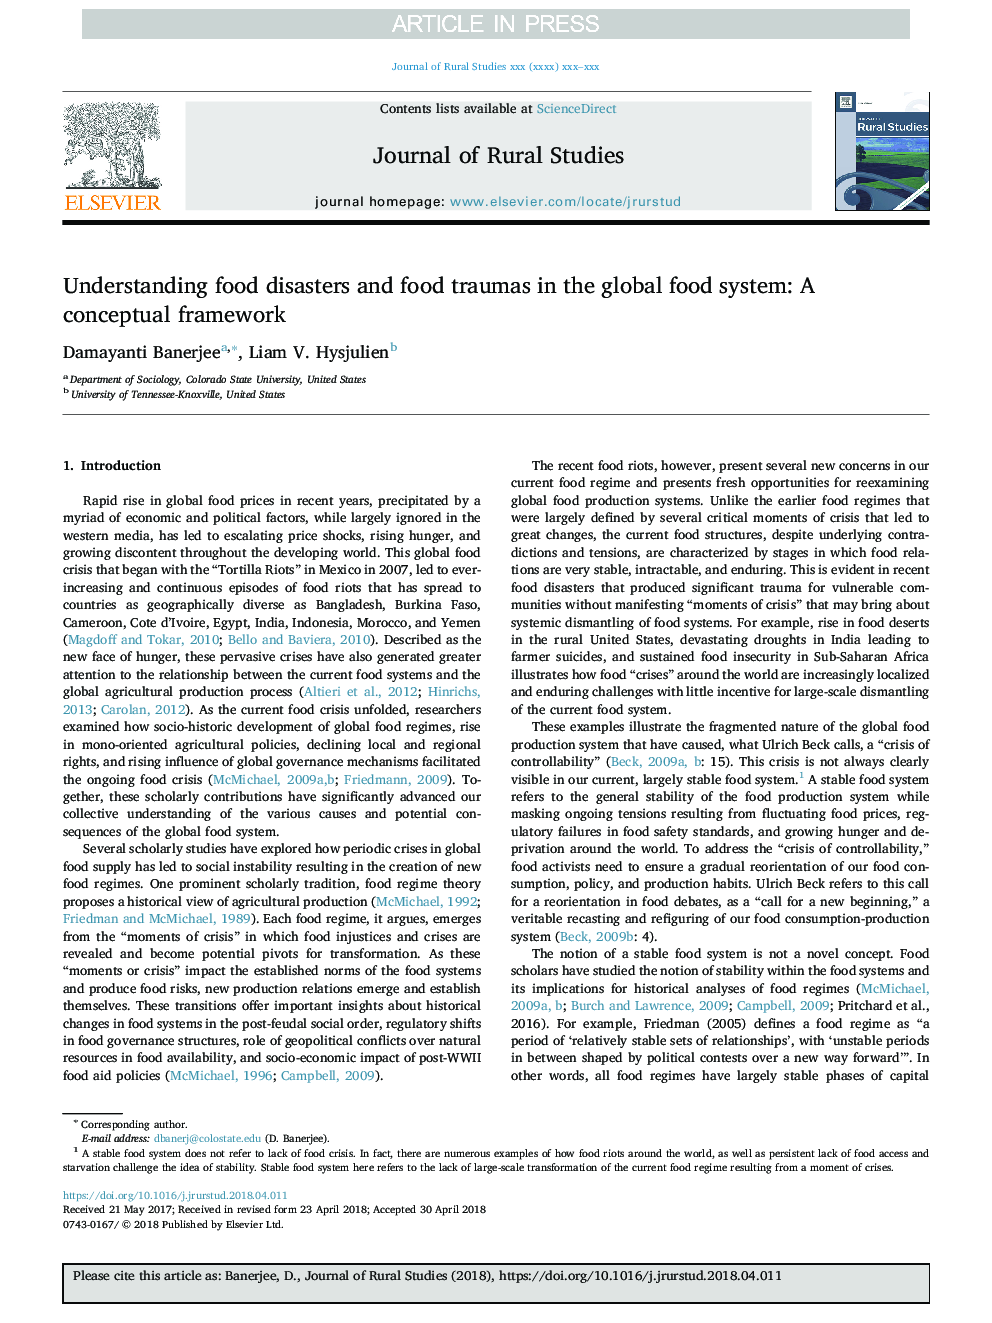 Understanding food disasters and food traumas in the global food system: A conceptual framework